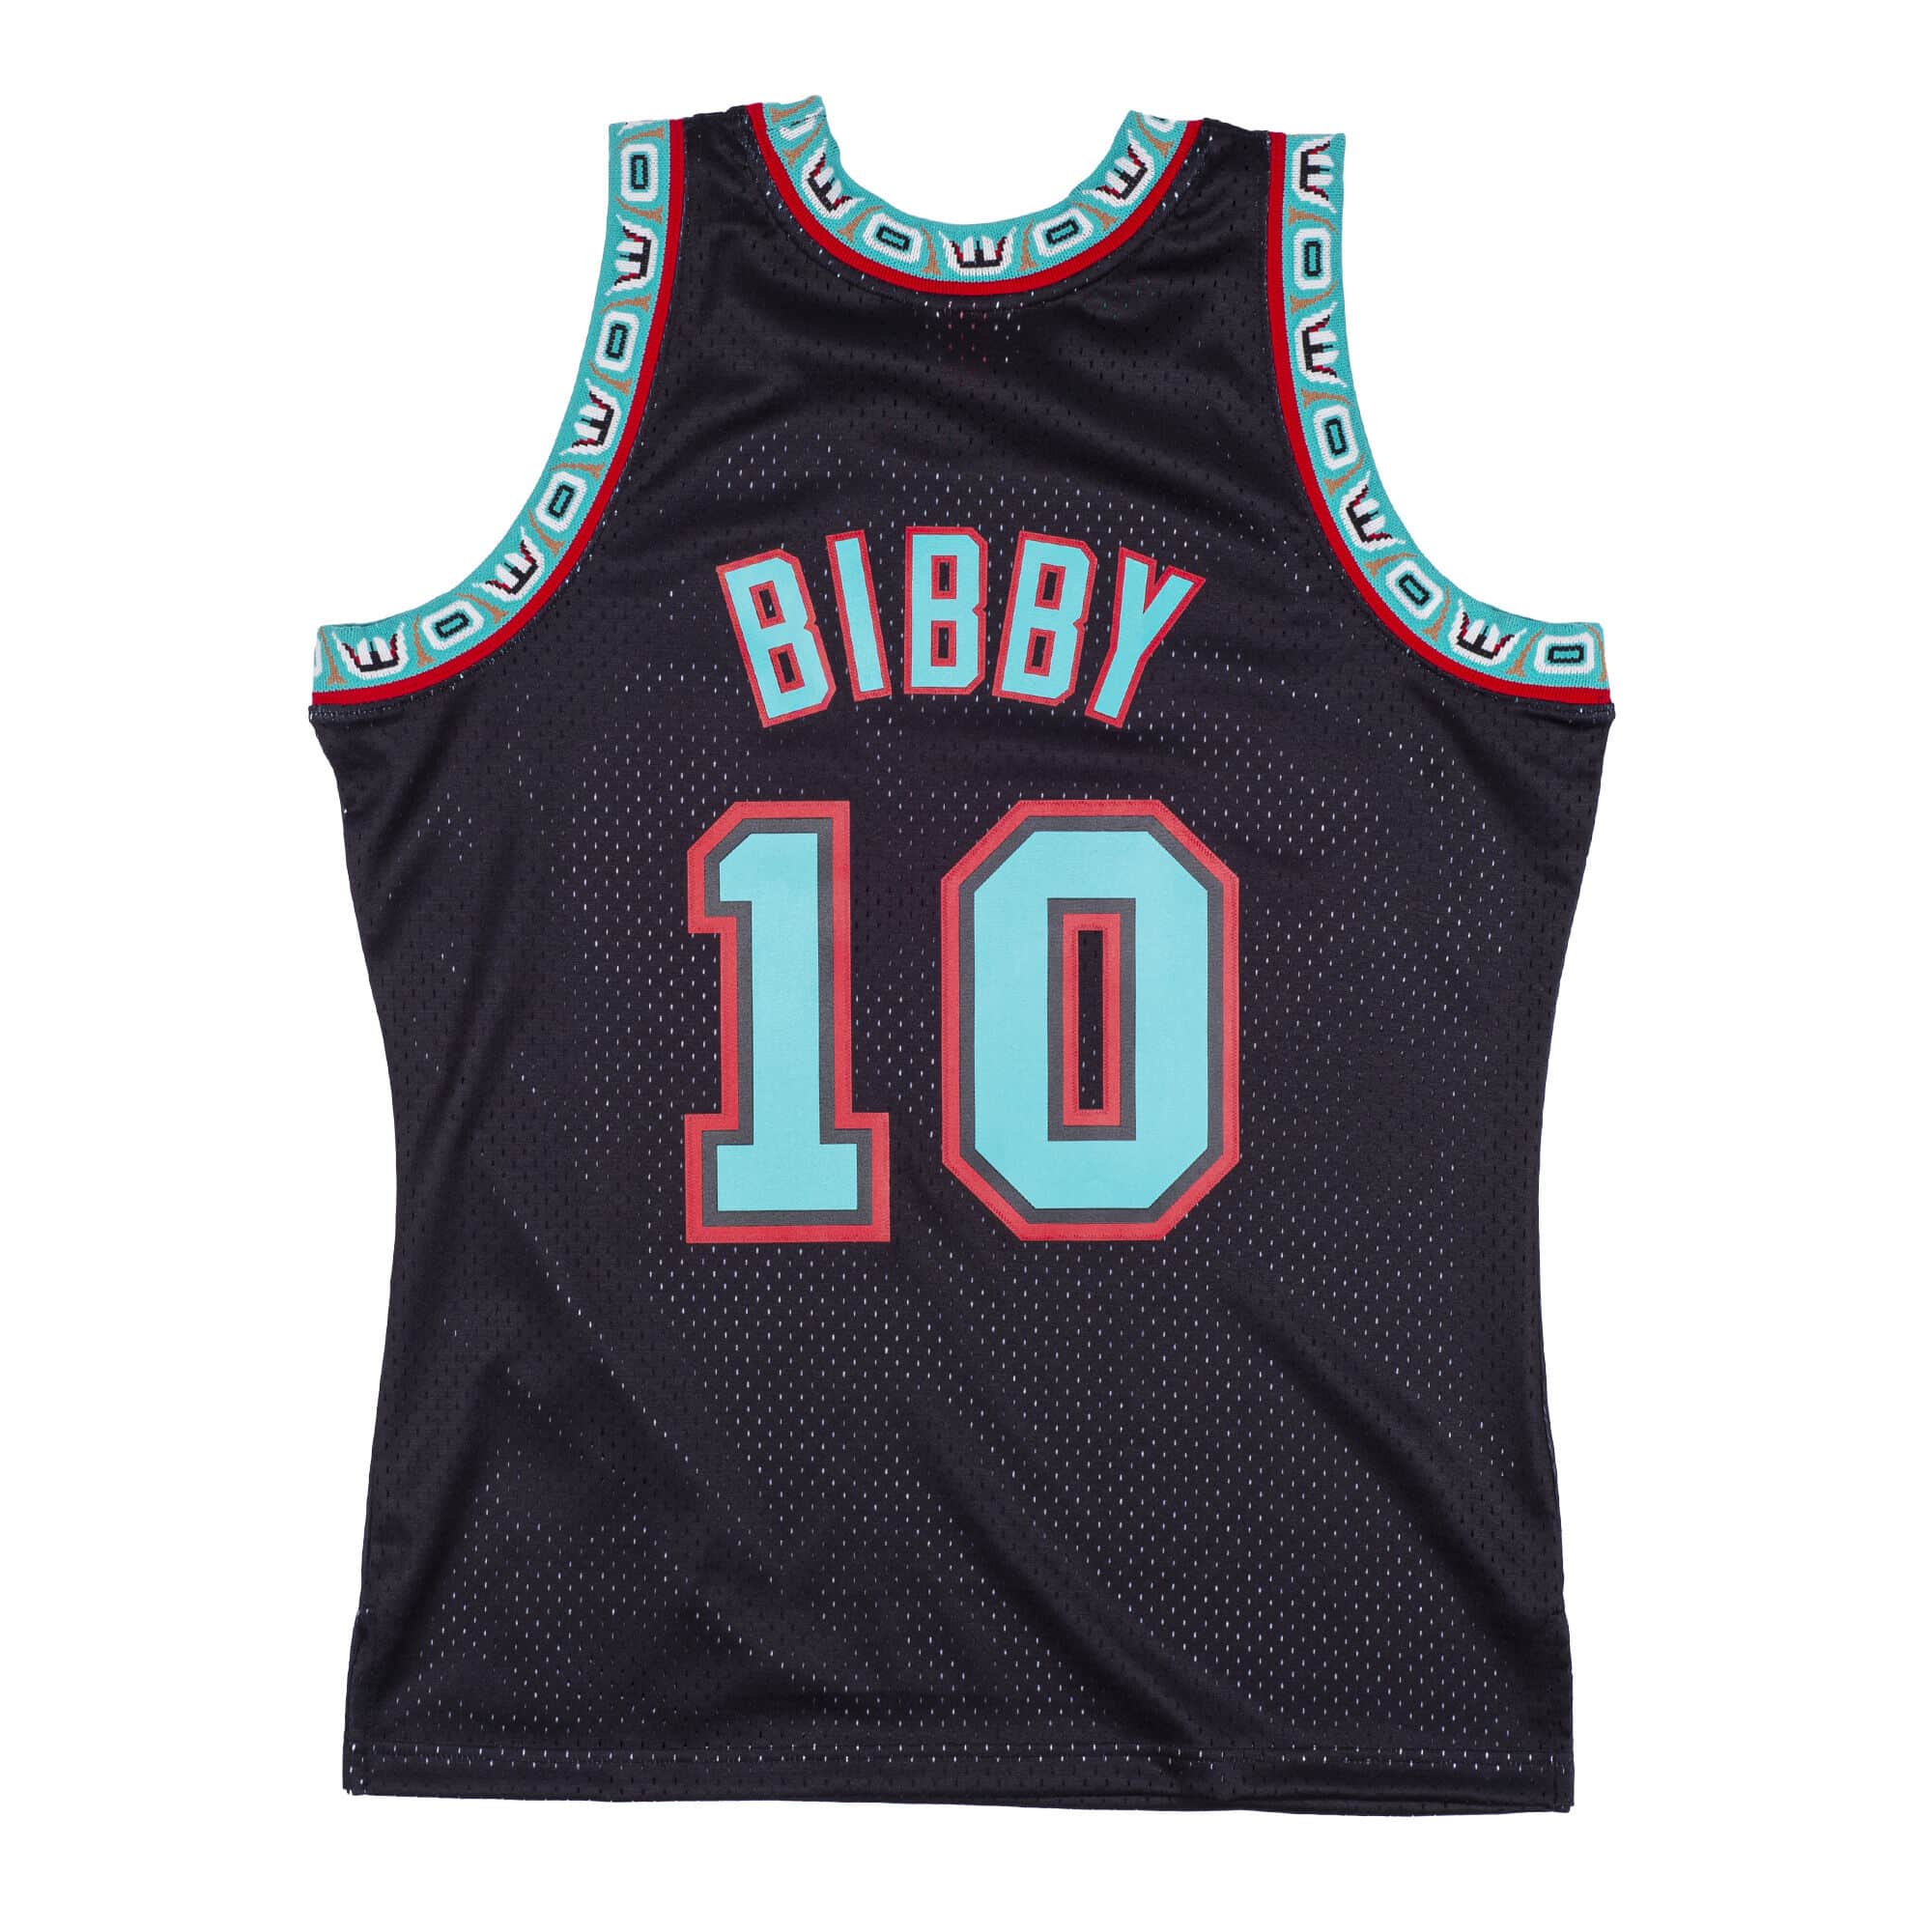 Mike Bibby Vancouver Grizzlies Jersey,Vancouver 10 Mike Bibby 3